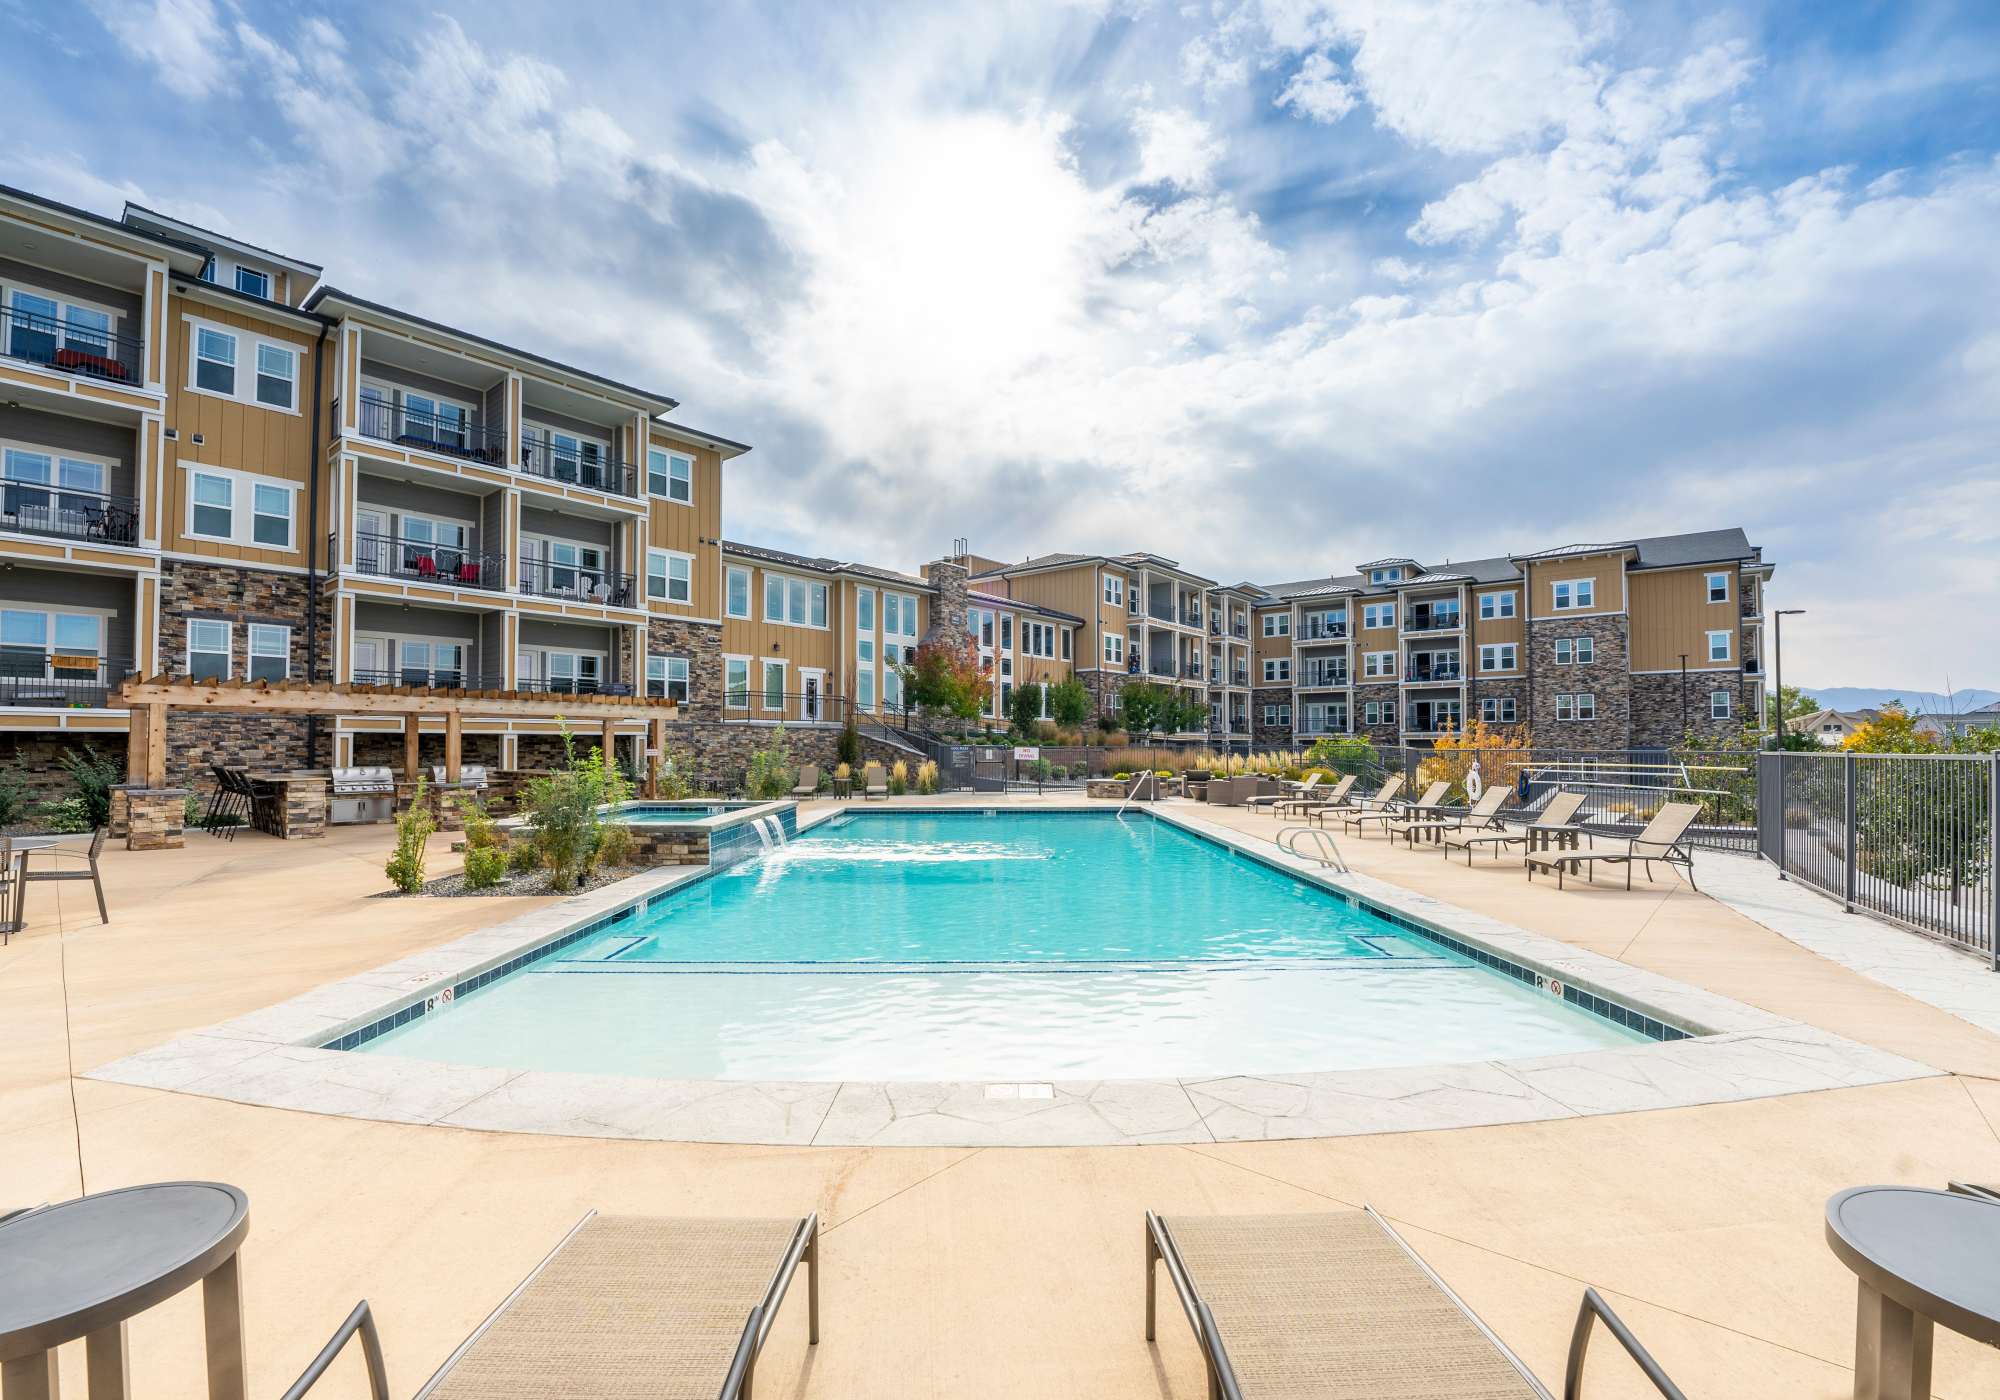 Apartments at Caliber at Hyland Village in Westminster, Colorado